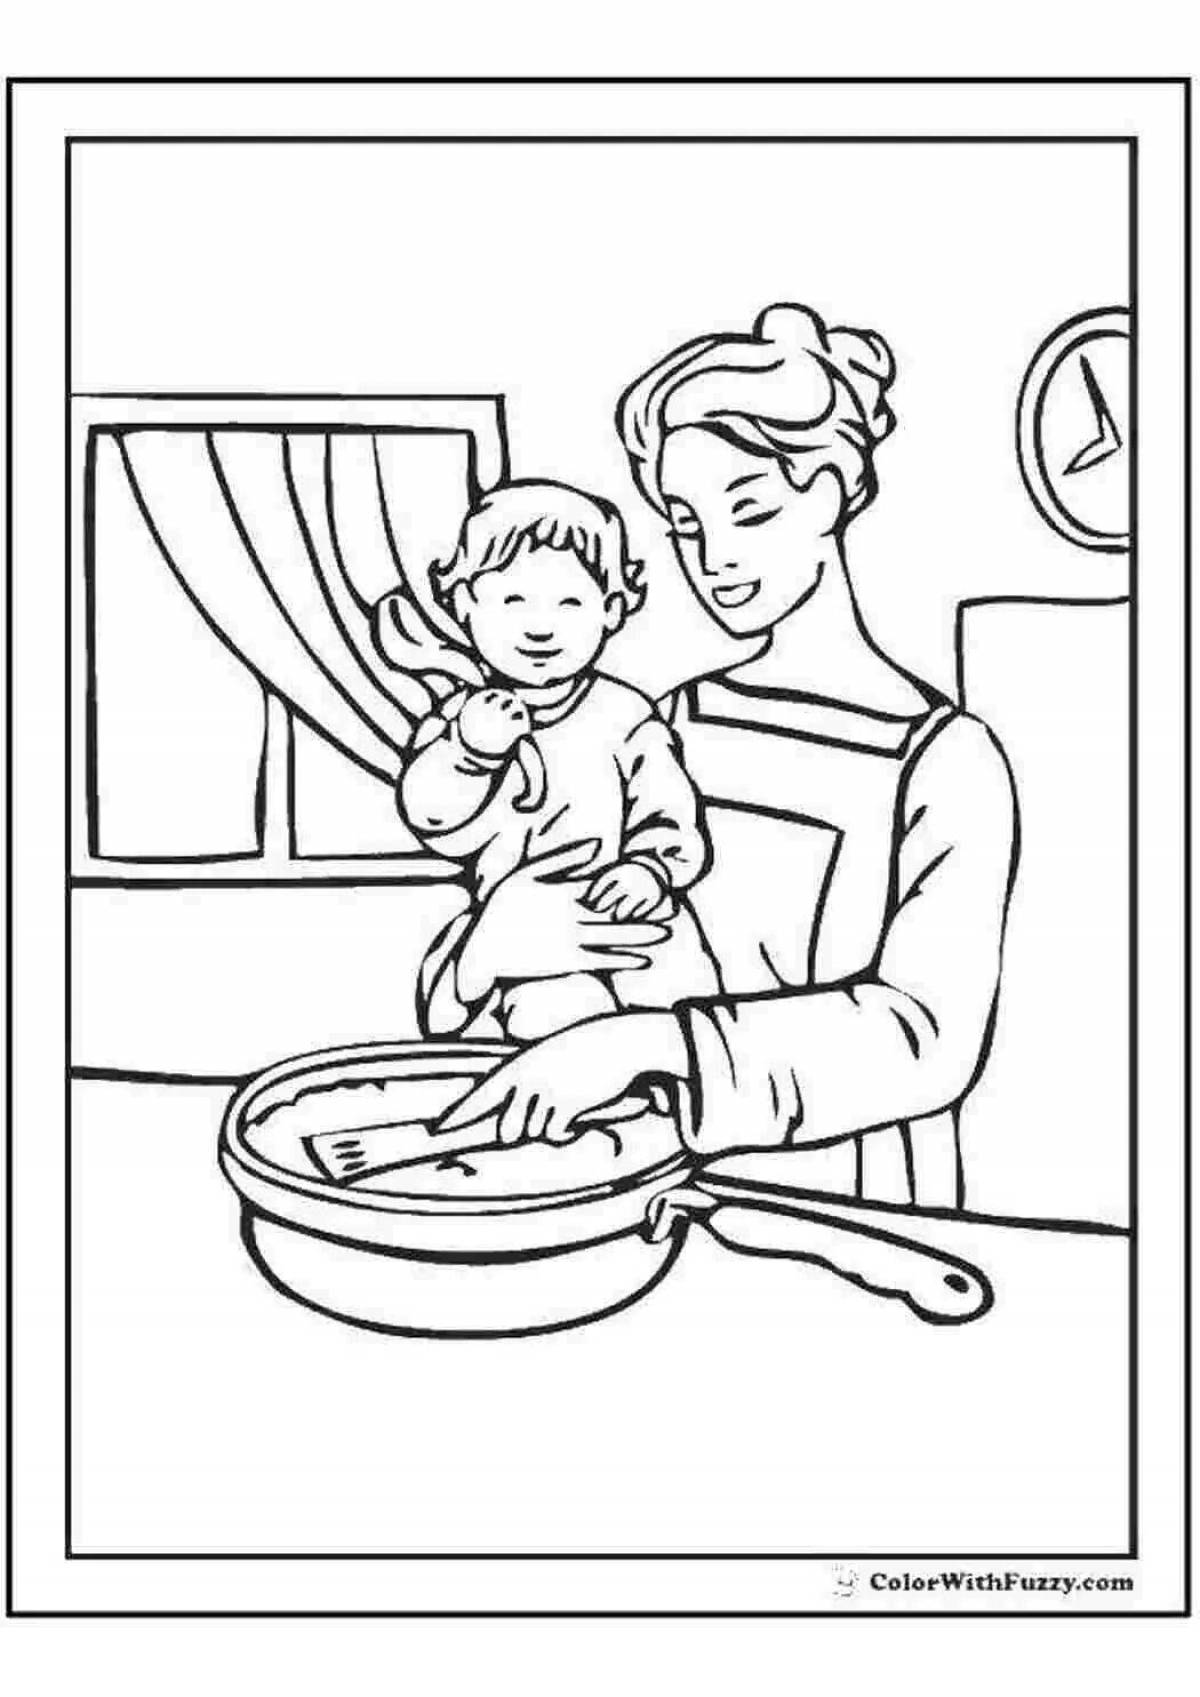 Coloring page radiant son and mother